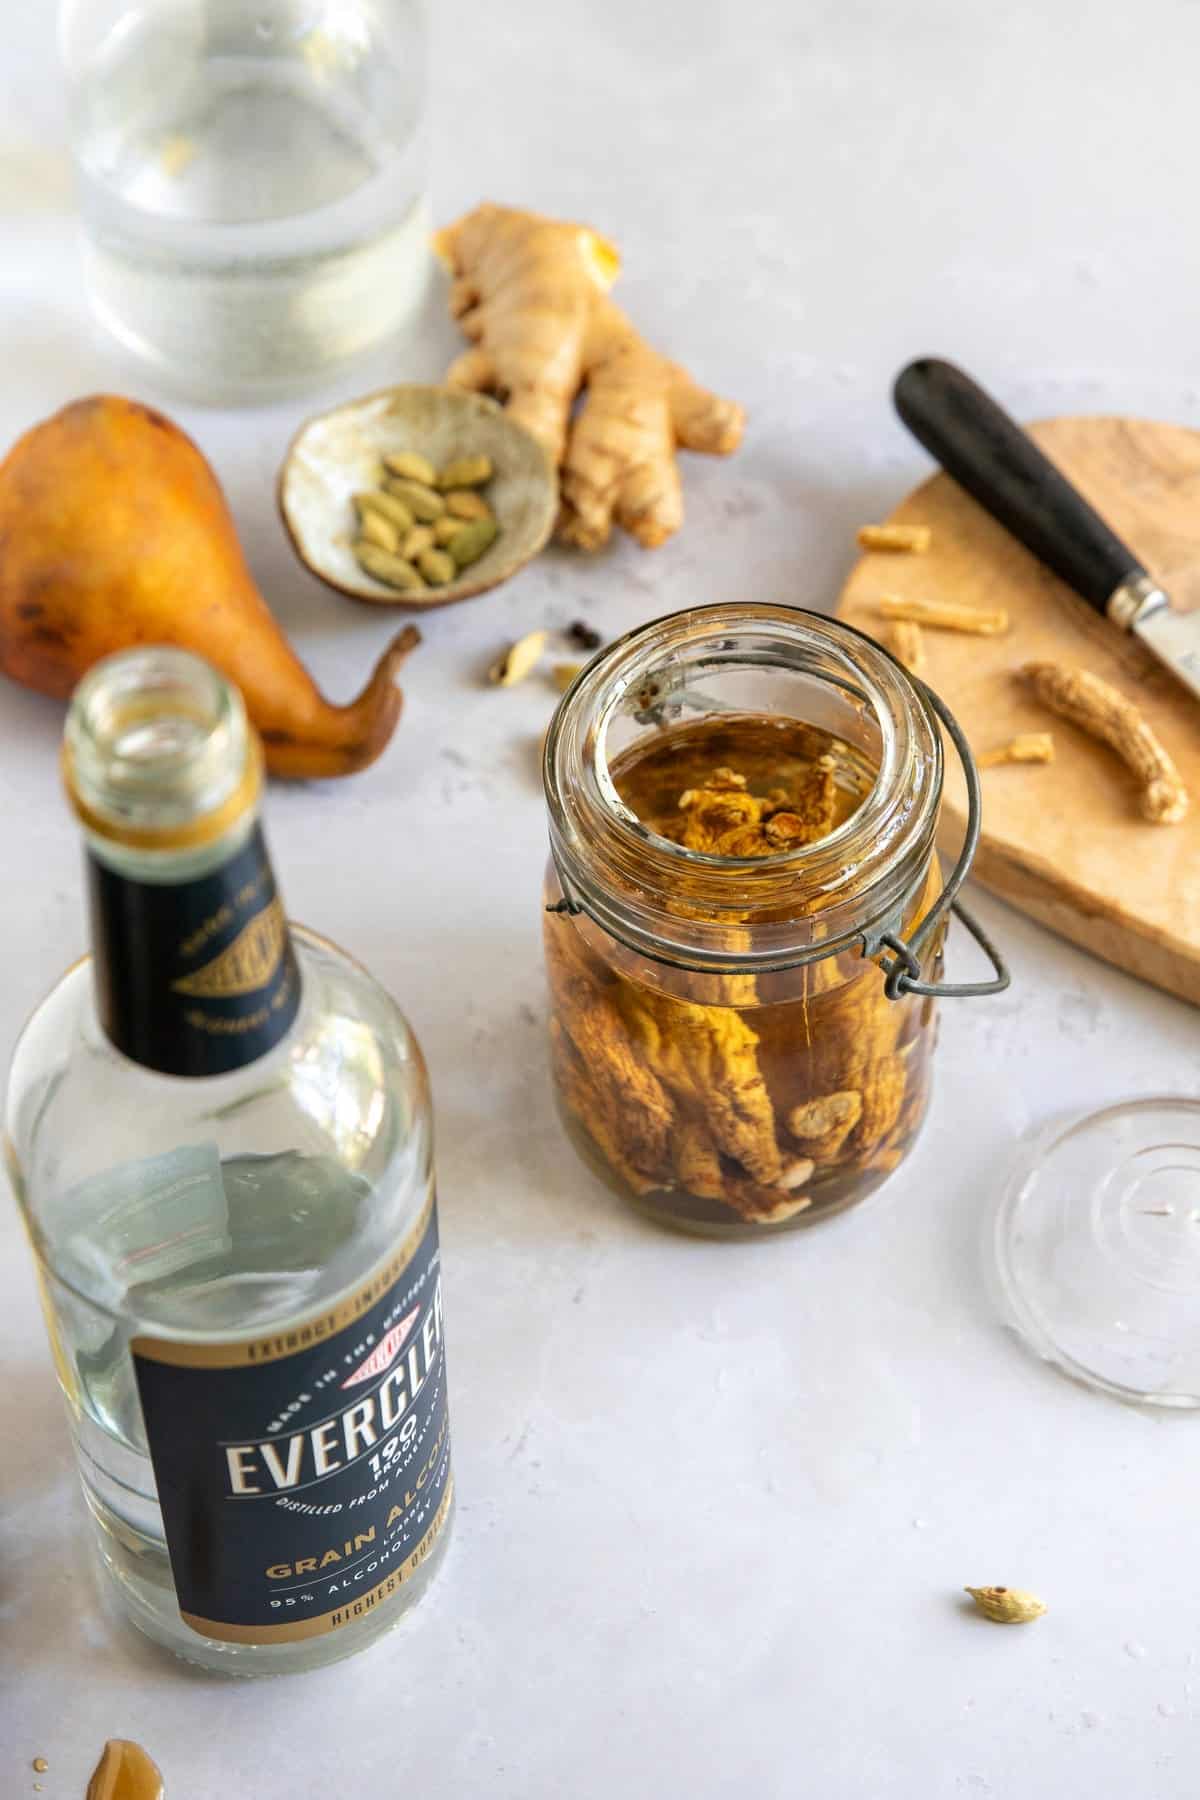 How to infuse your own tincture recipe into Everclear